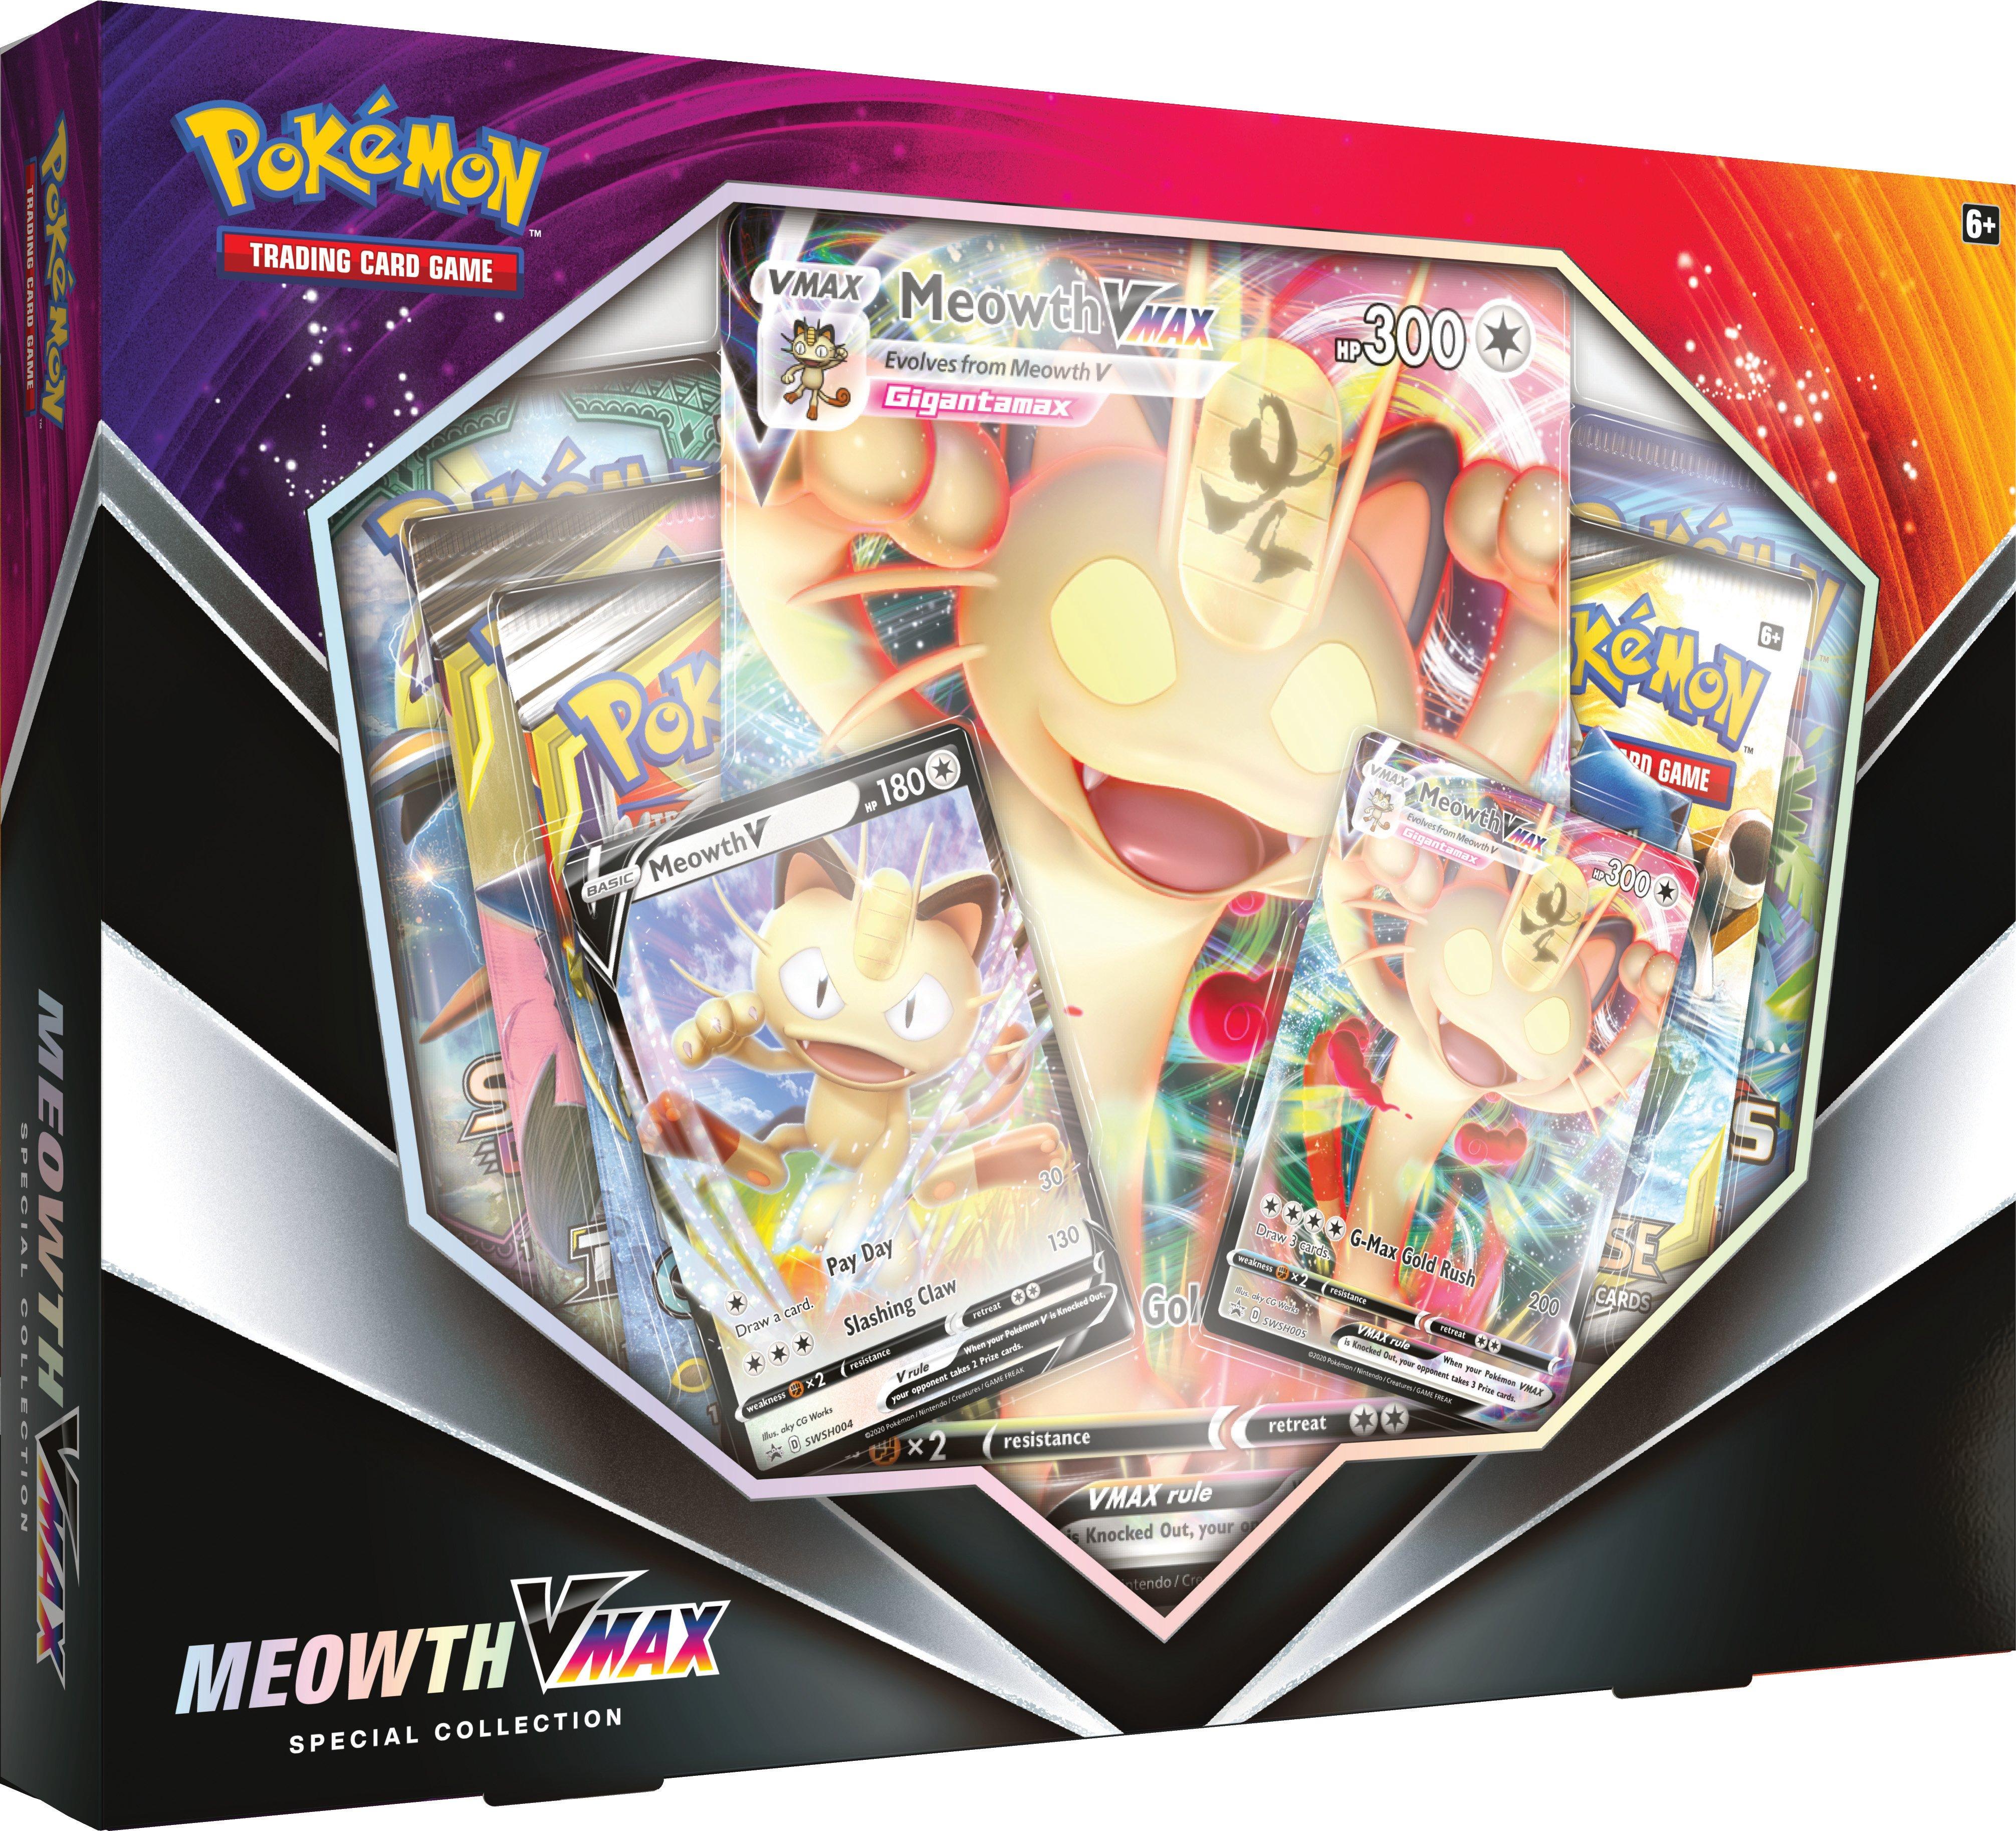 Pokemon Trading Card Game: Meowth VMAX Special Collection